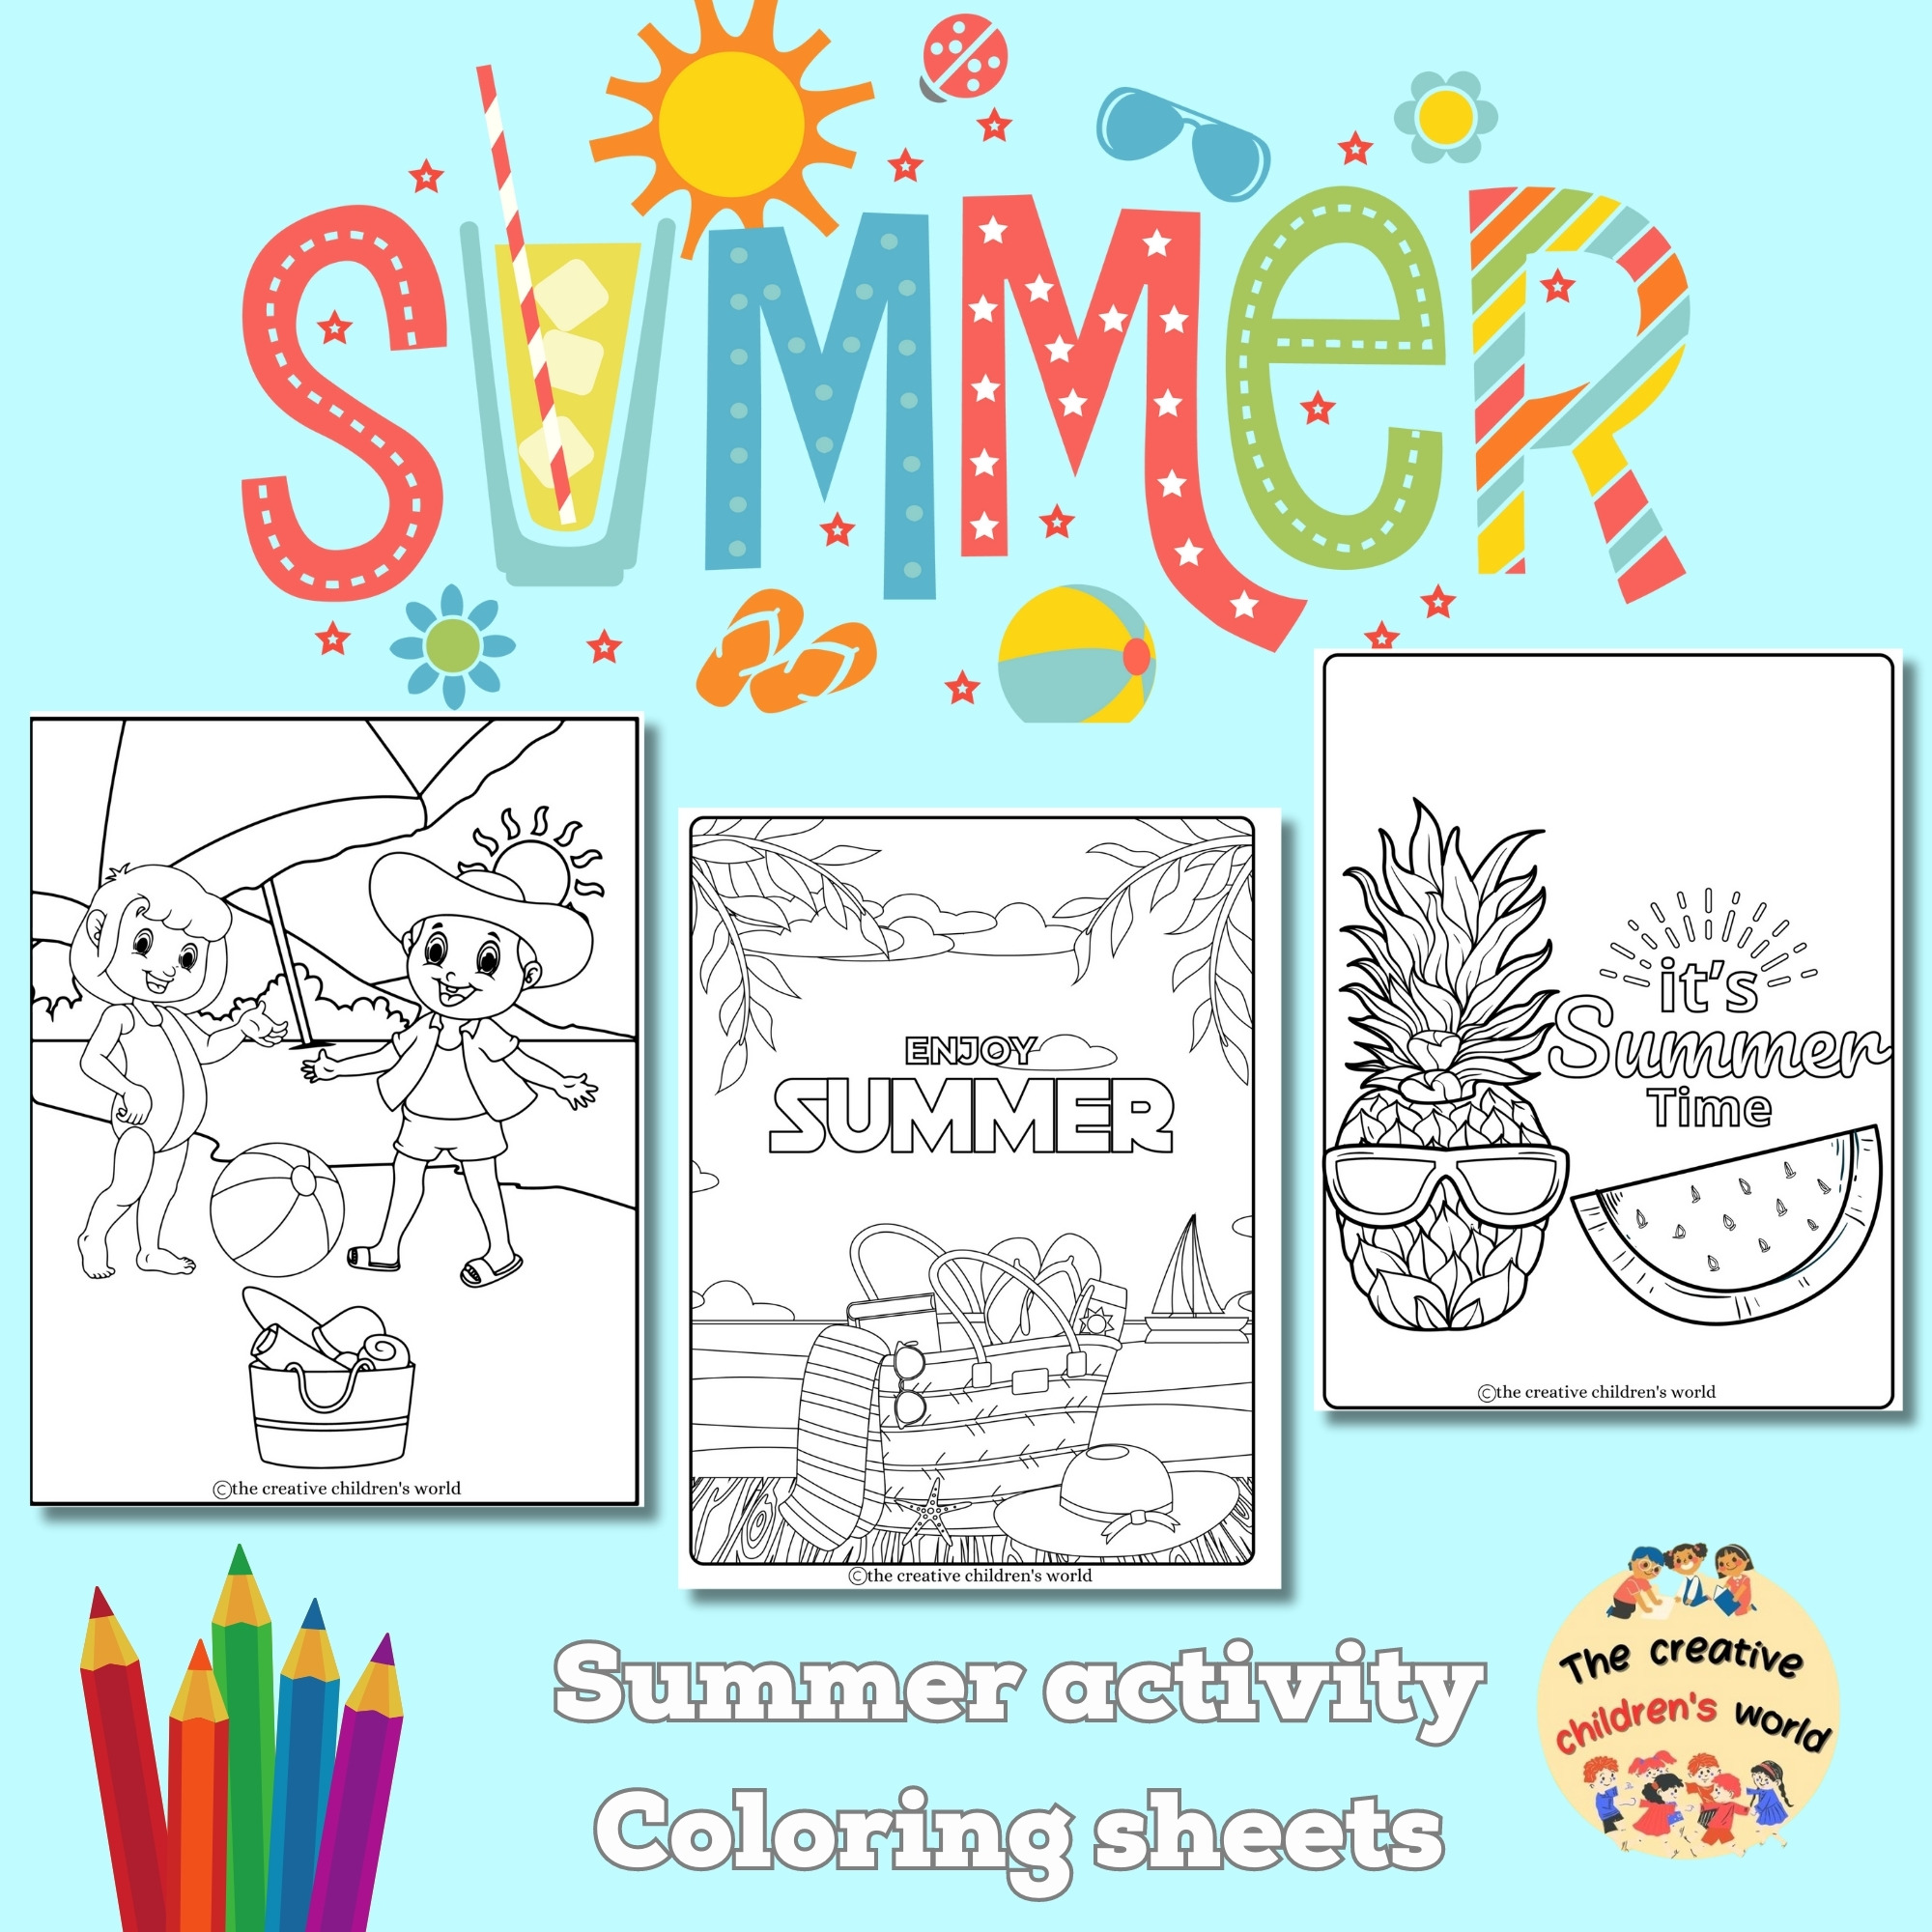 Summer activities coloring sheetsprintable summer coloring pages made by teachers